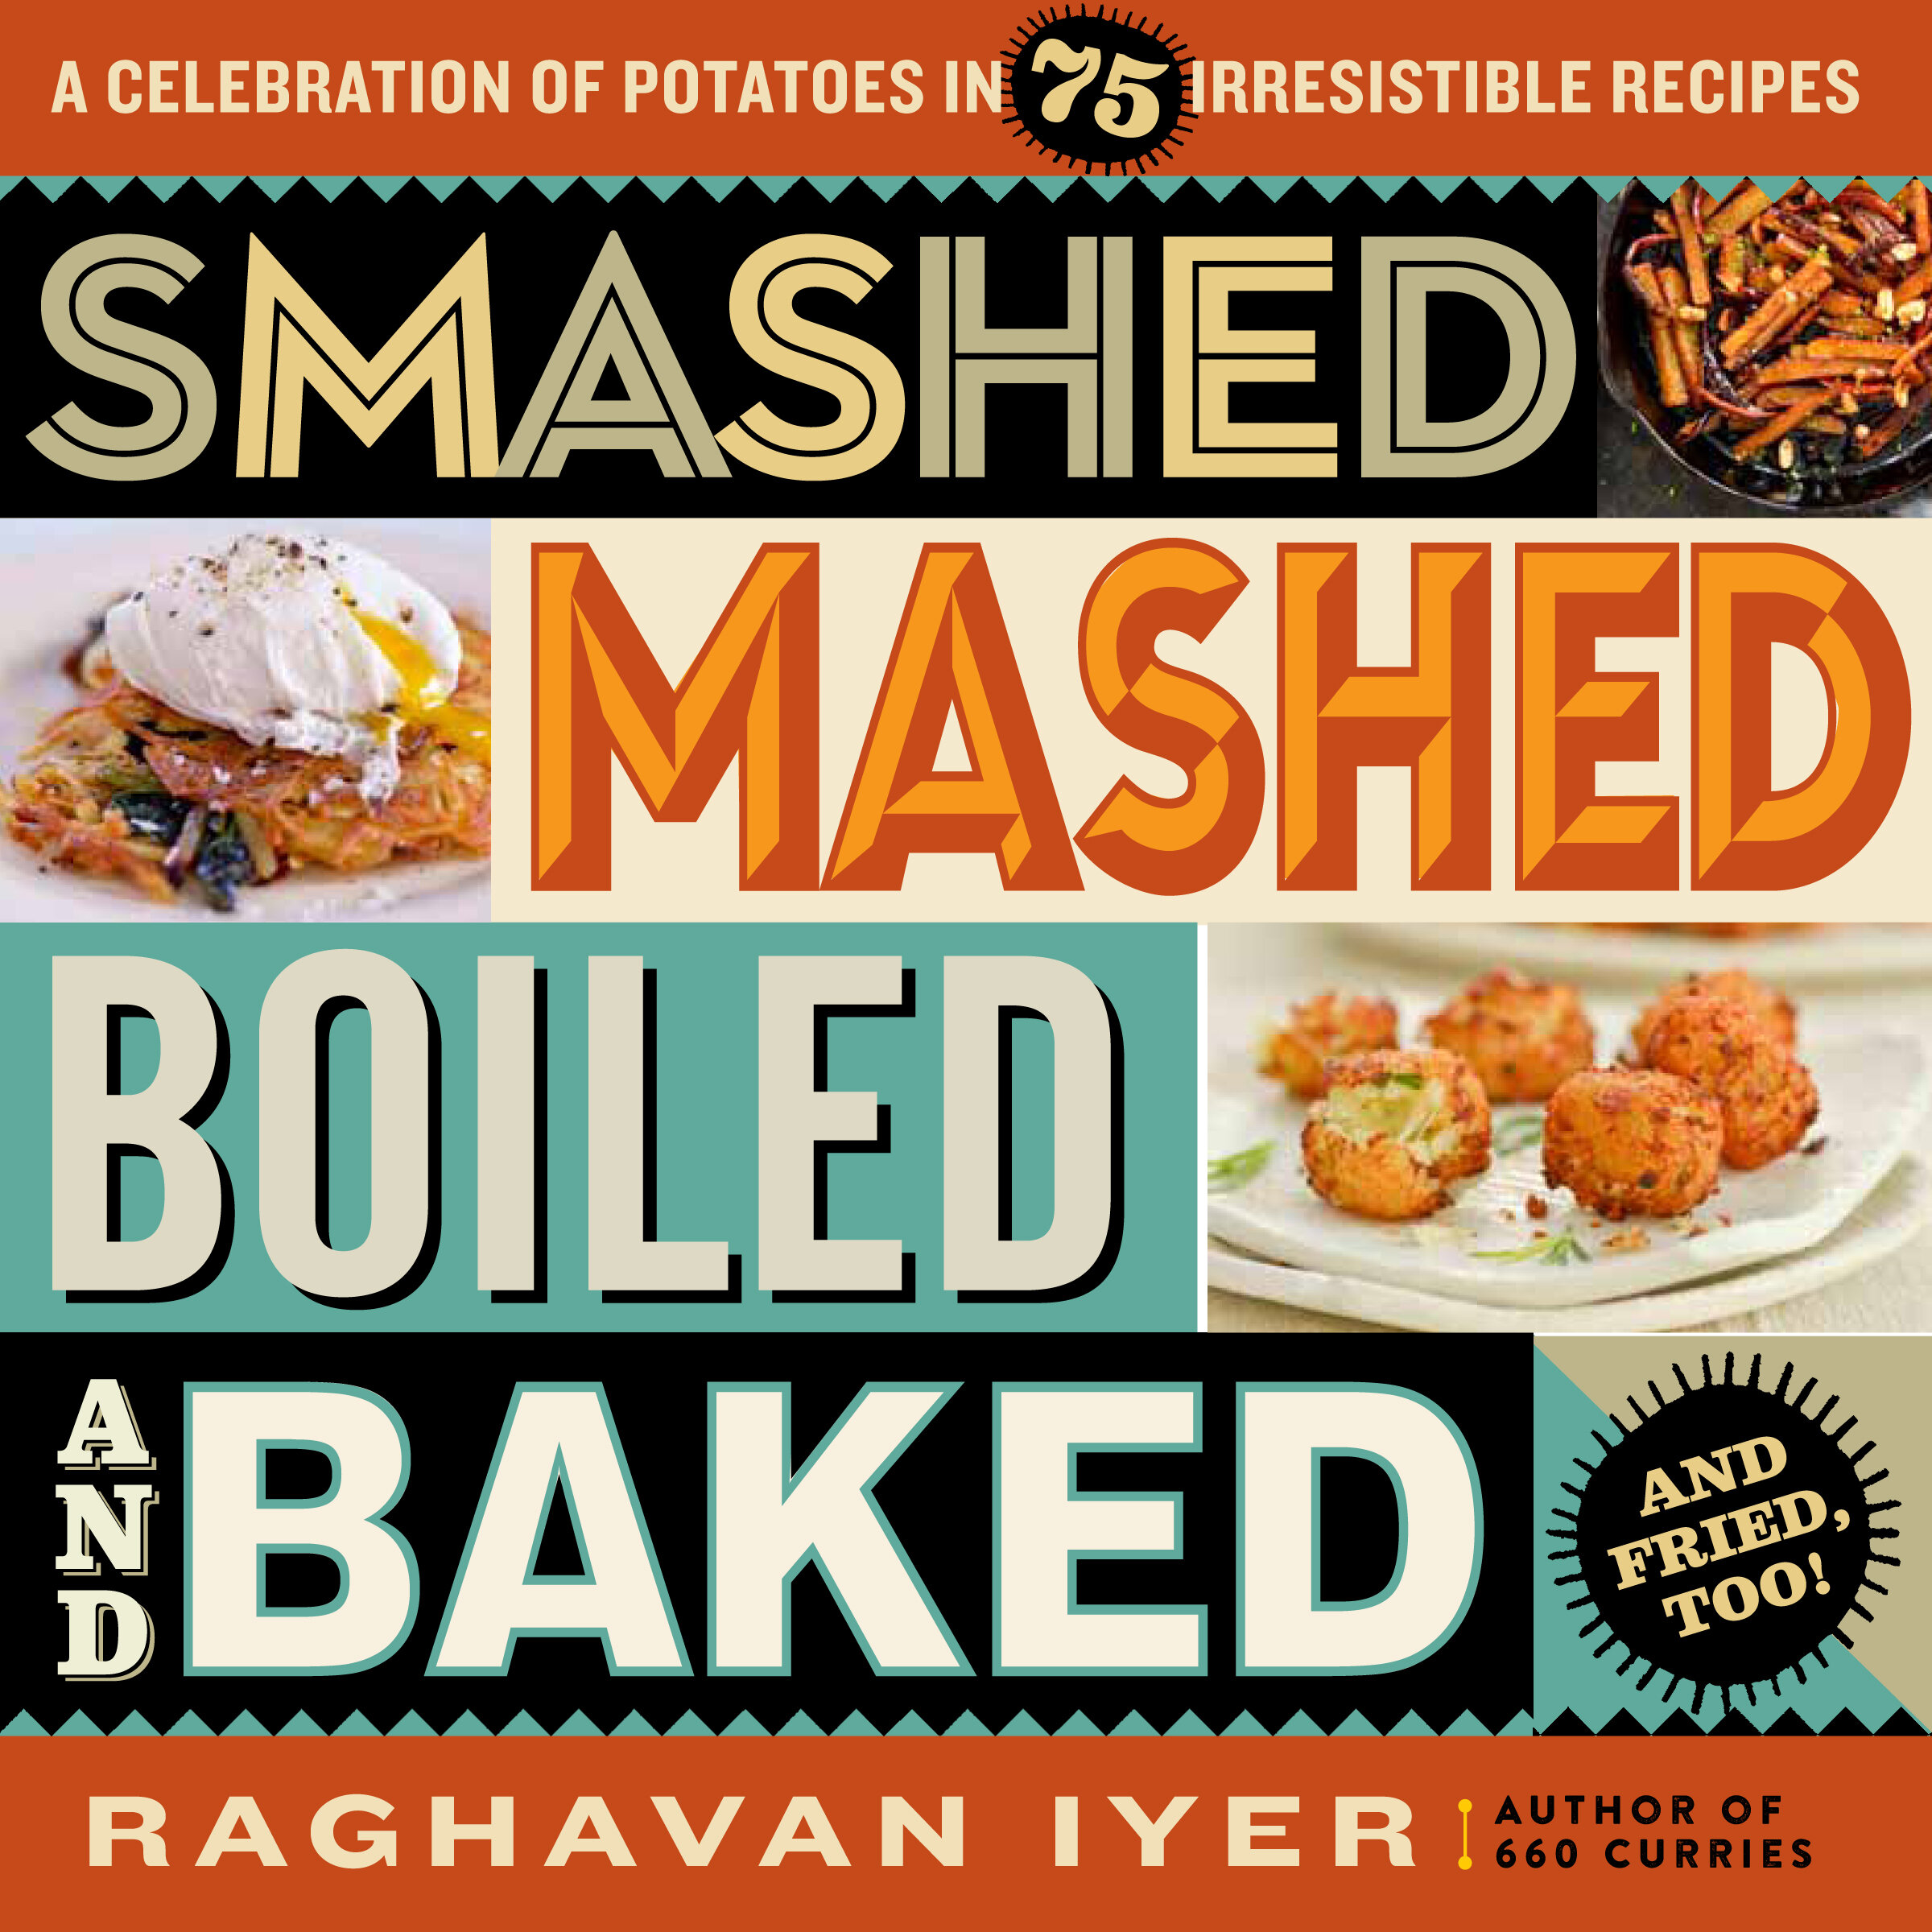 Smashed, Mashed, Boiled, and Baked—and Fried, Too!